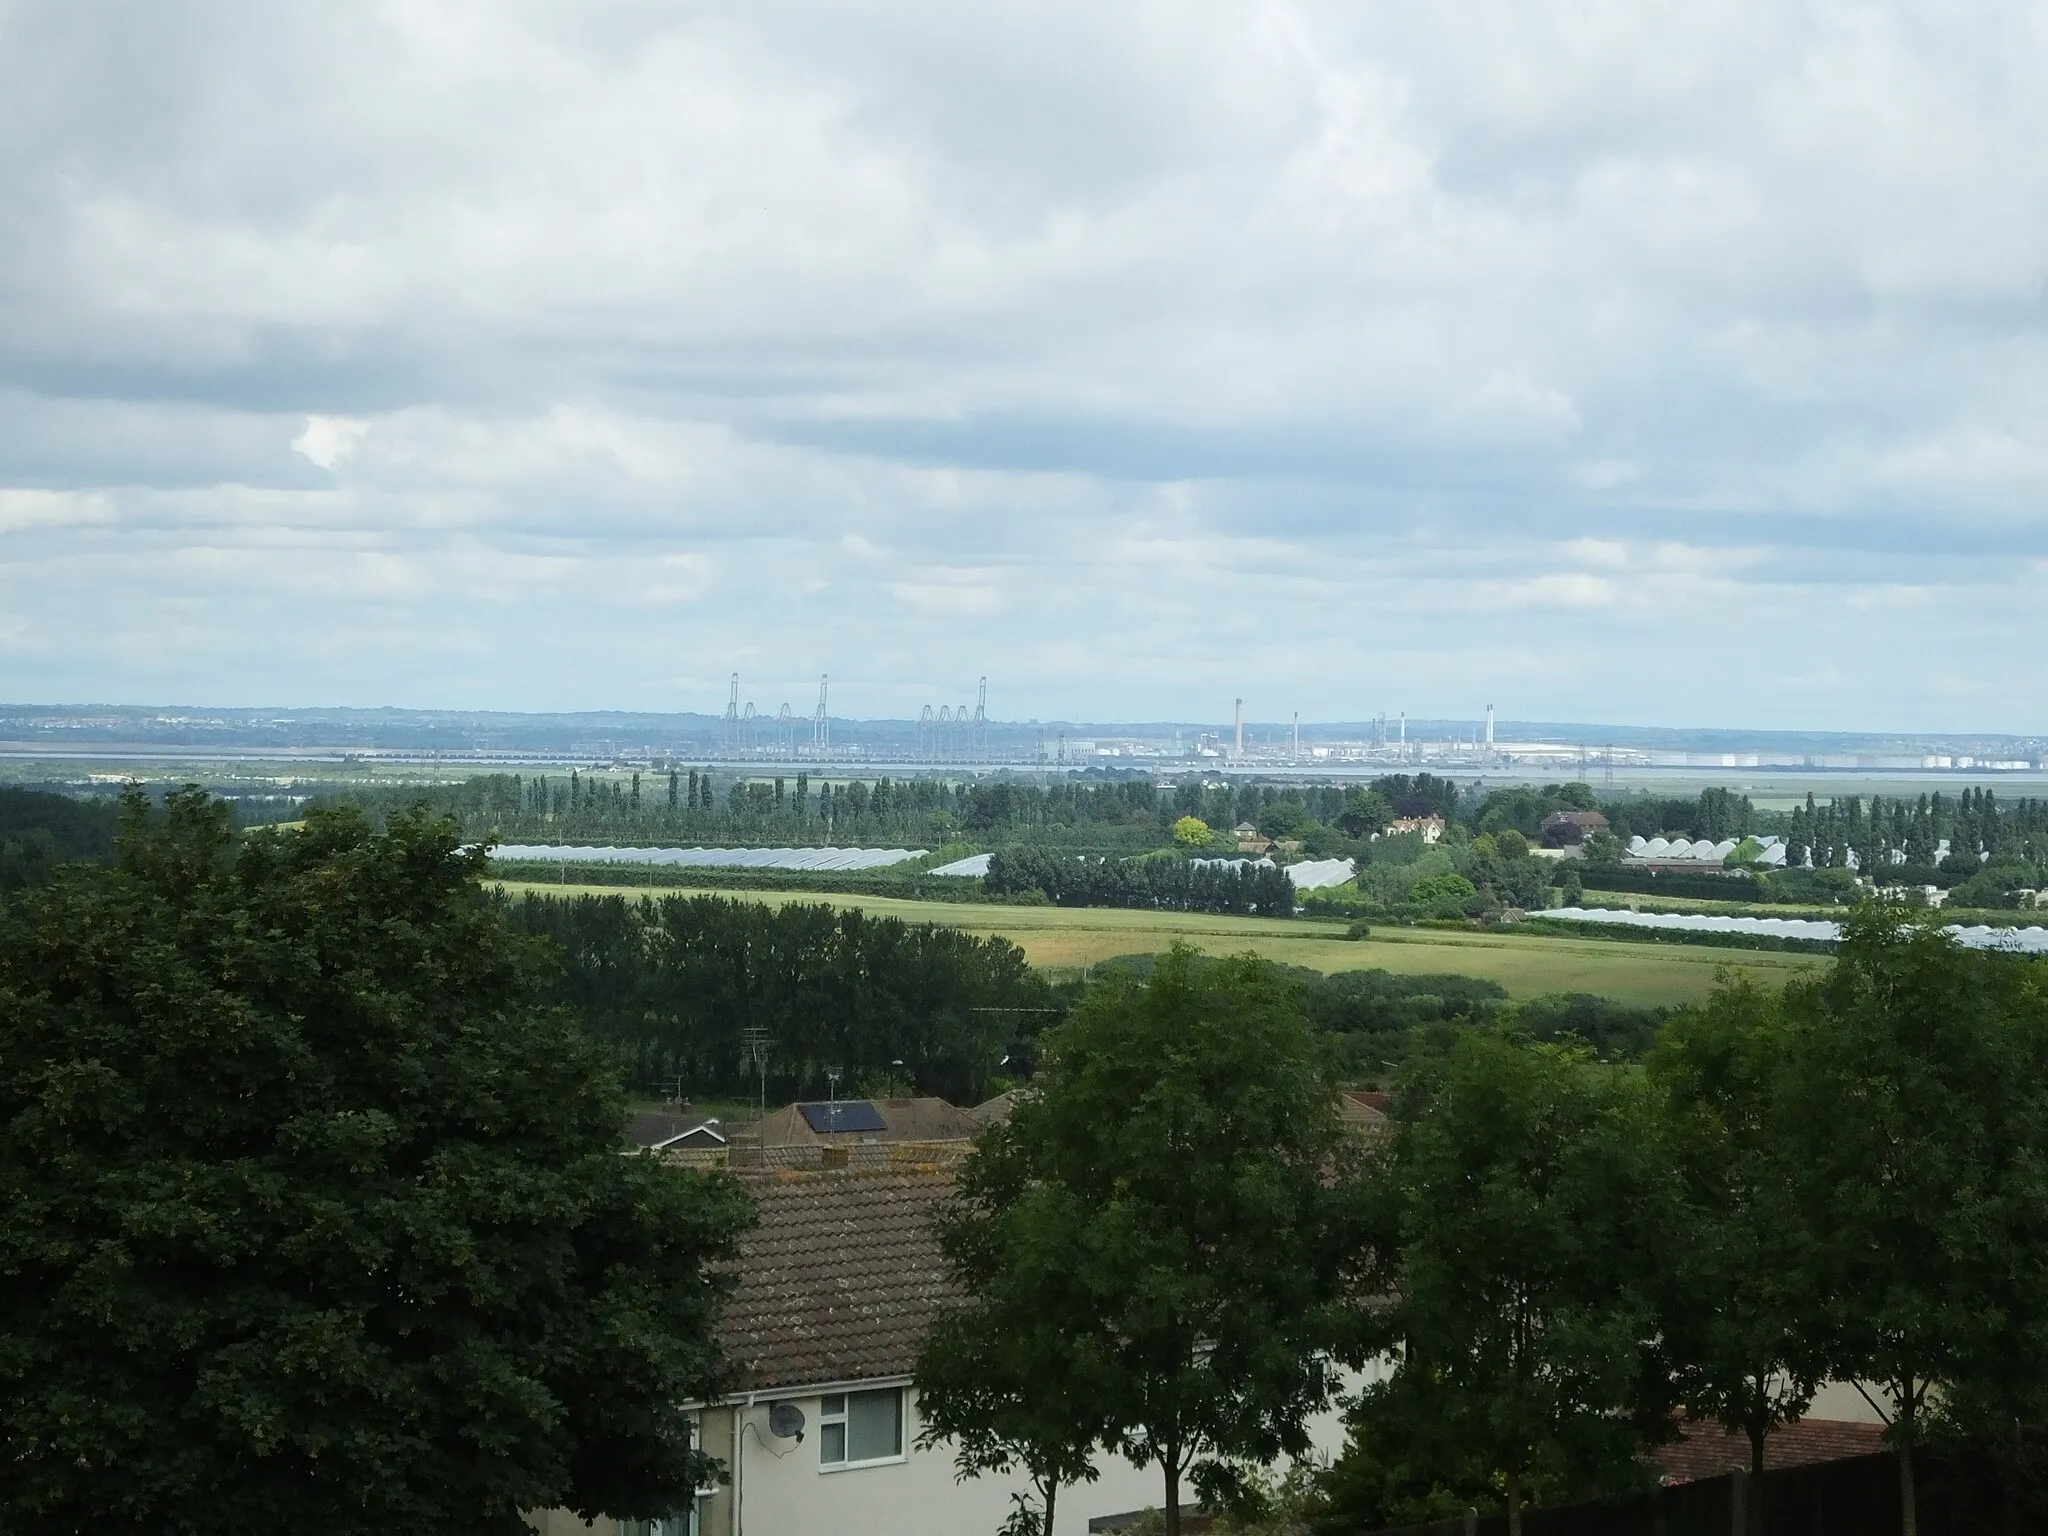 Photo showing: The Broomhill Park is a community supported park in Strood, Kent. It features a view over the River Thames estuary and over the River Medway. The Thames view.